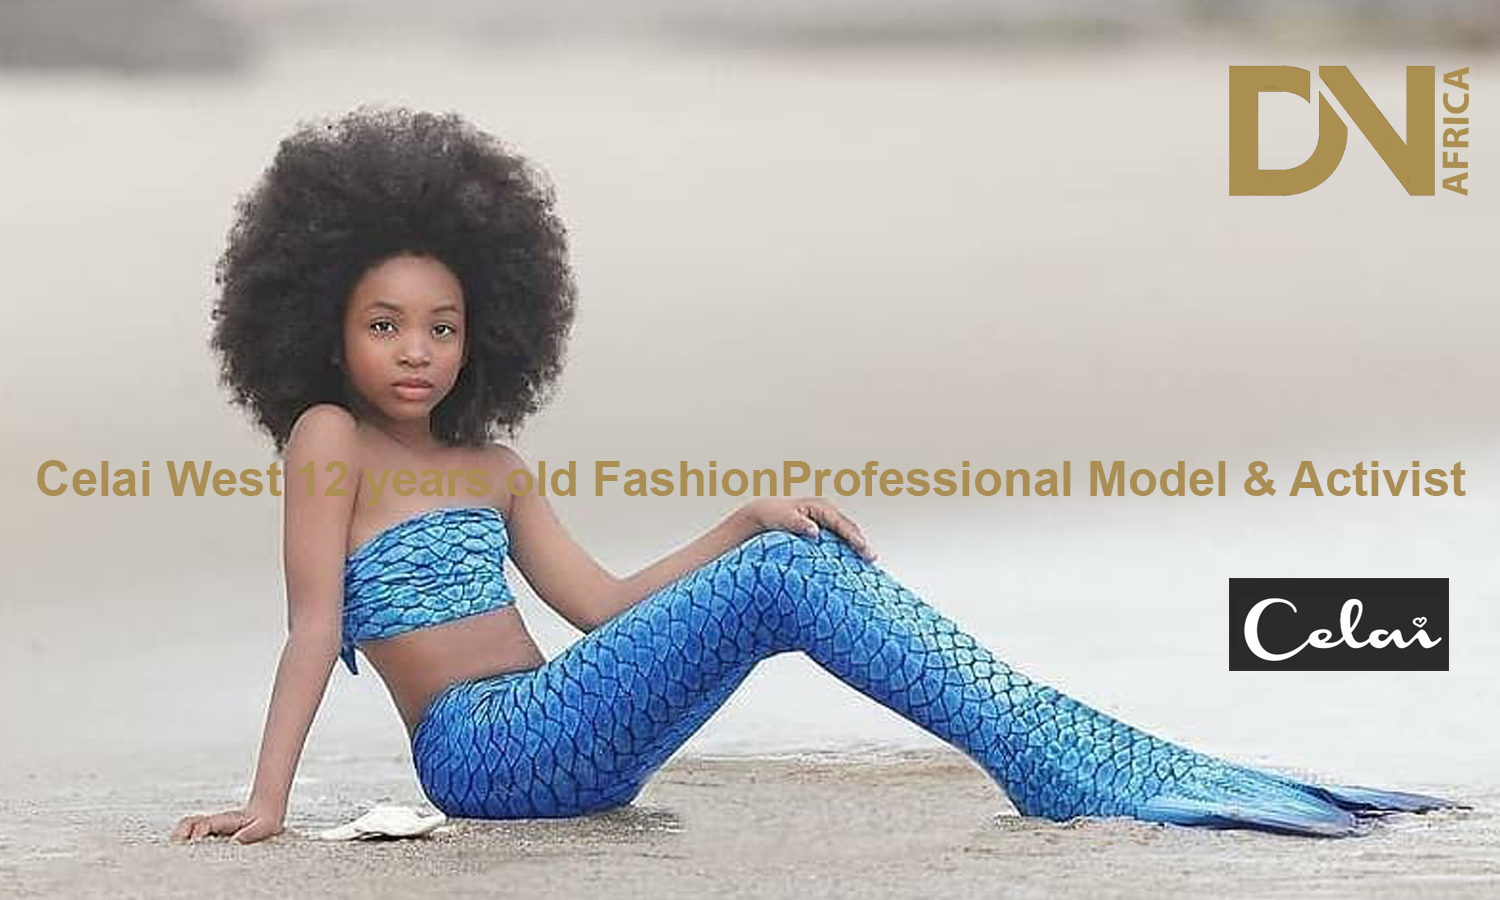 Celai West 12 Years Old Fashion Professional Model And Activist Dn